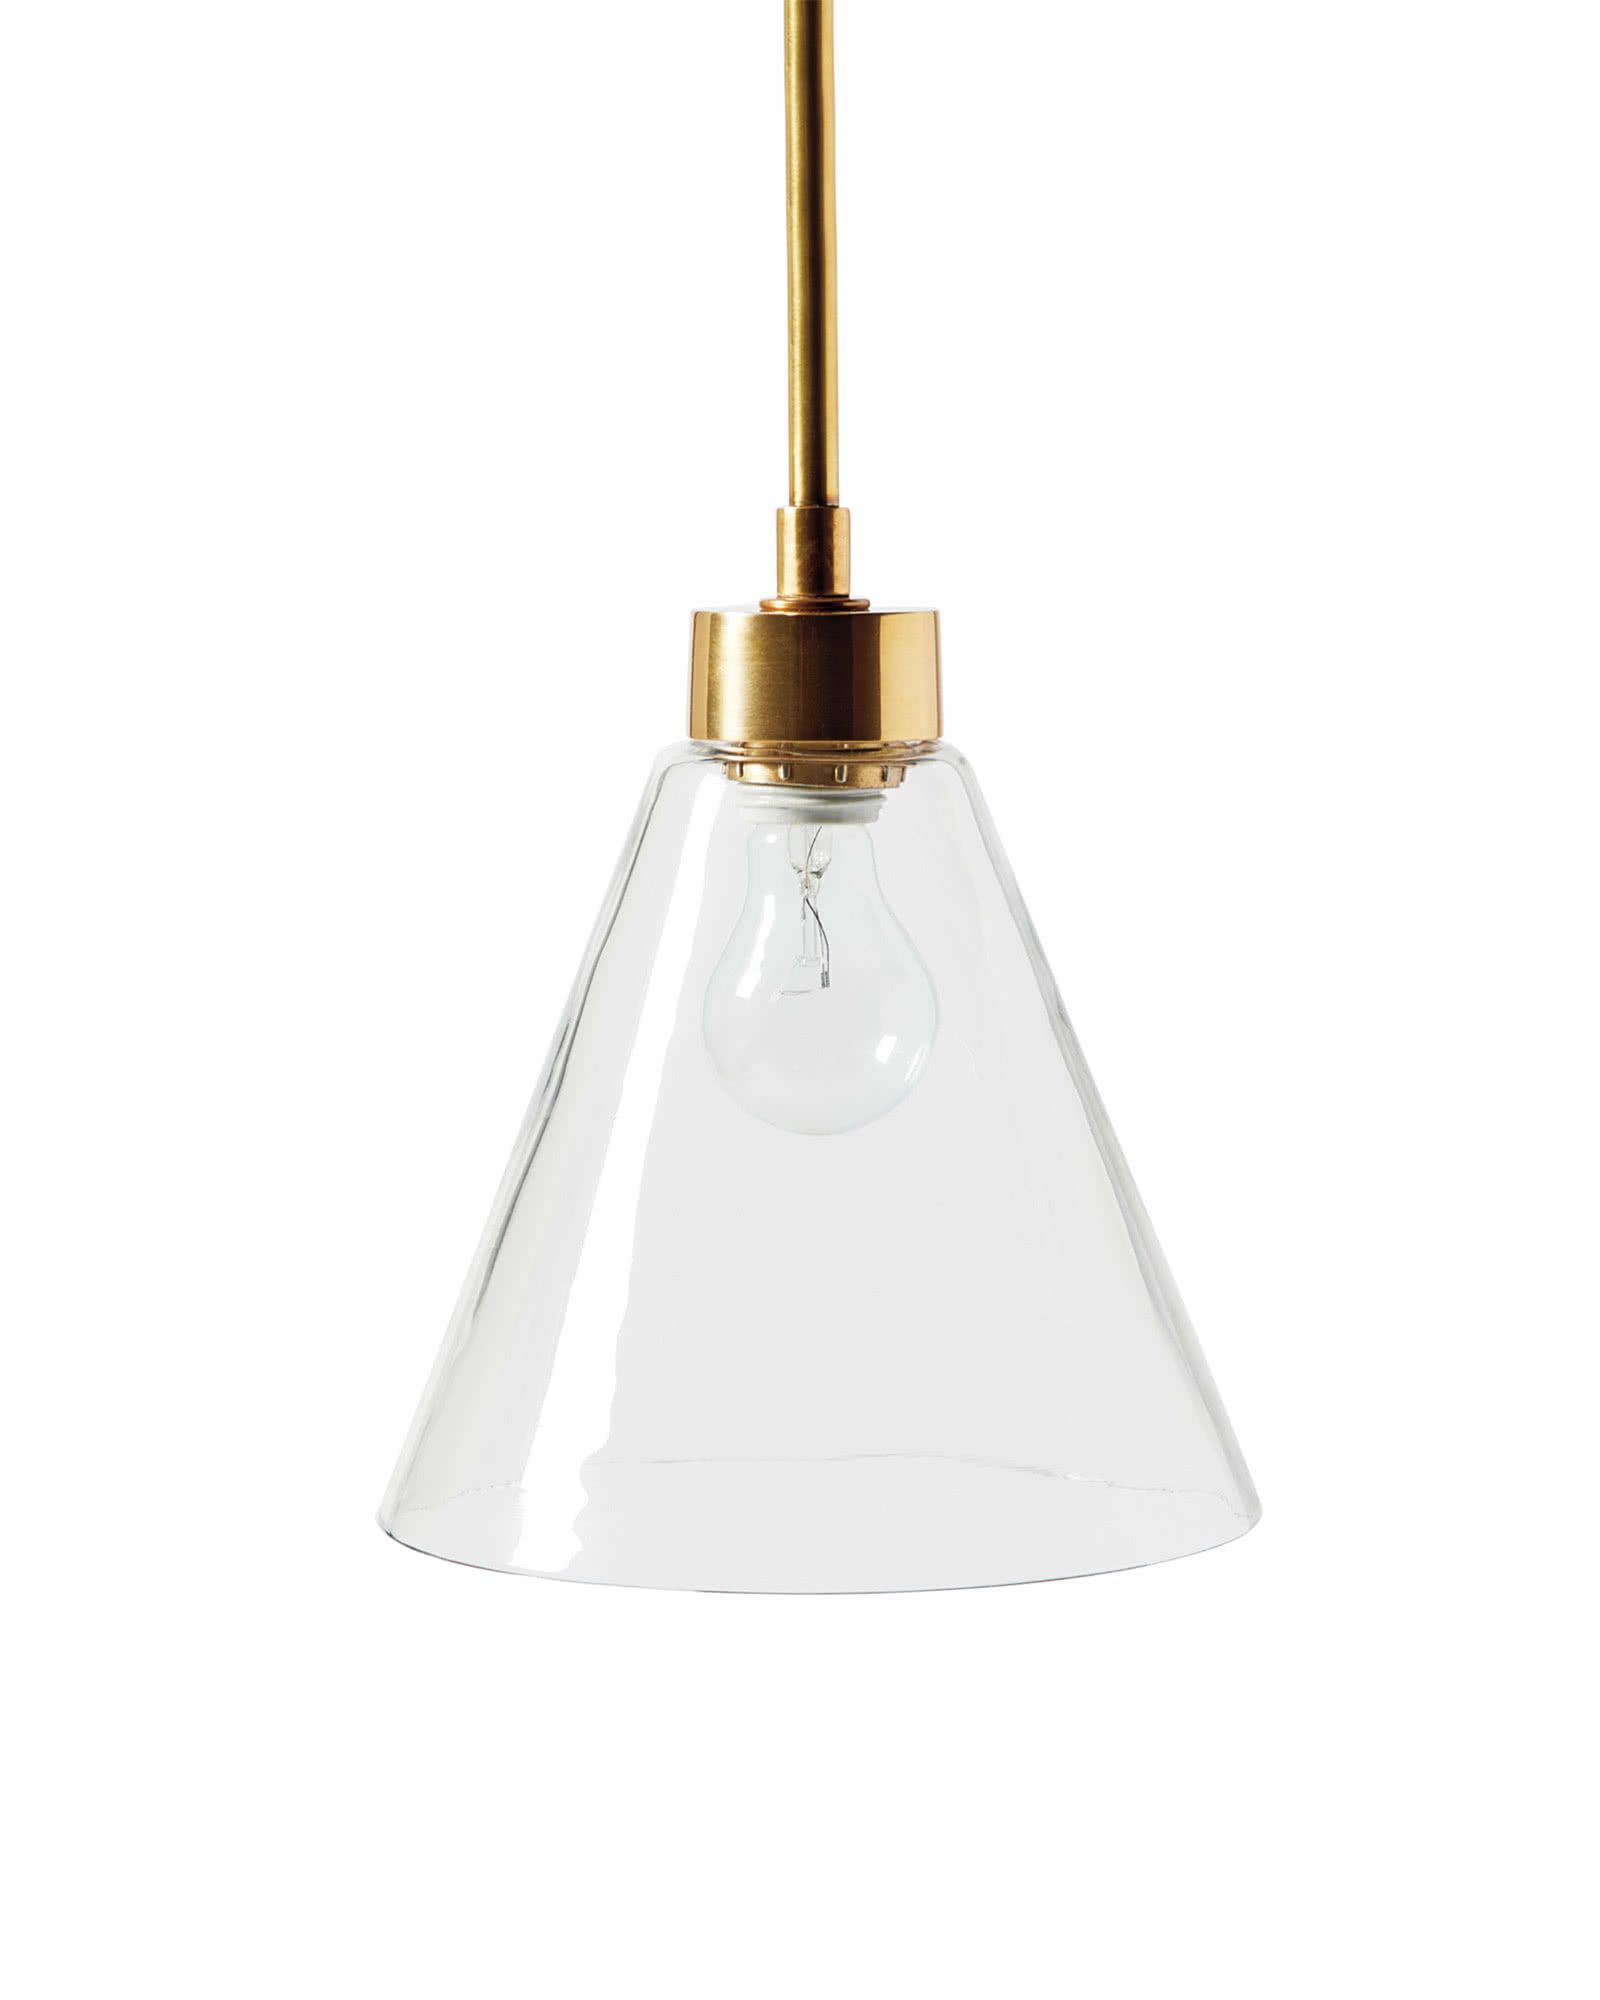 Claremont Pendant | Serena and Lily